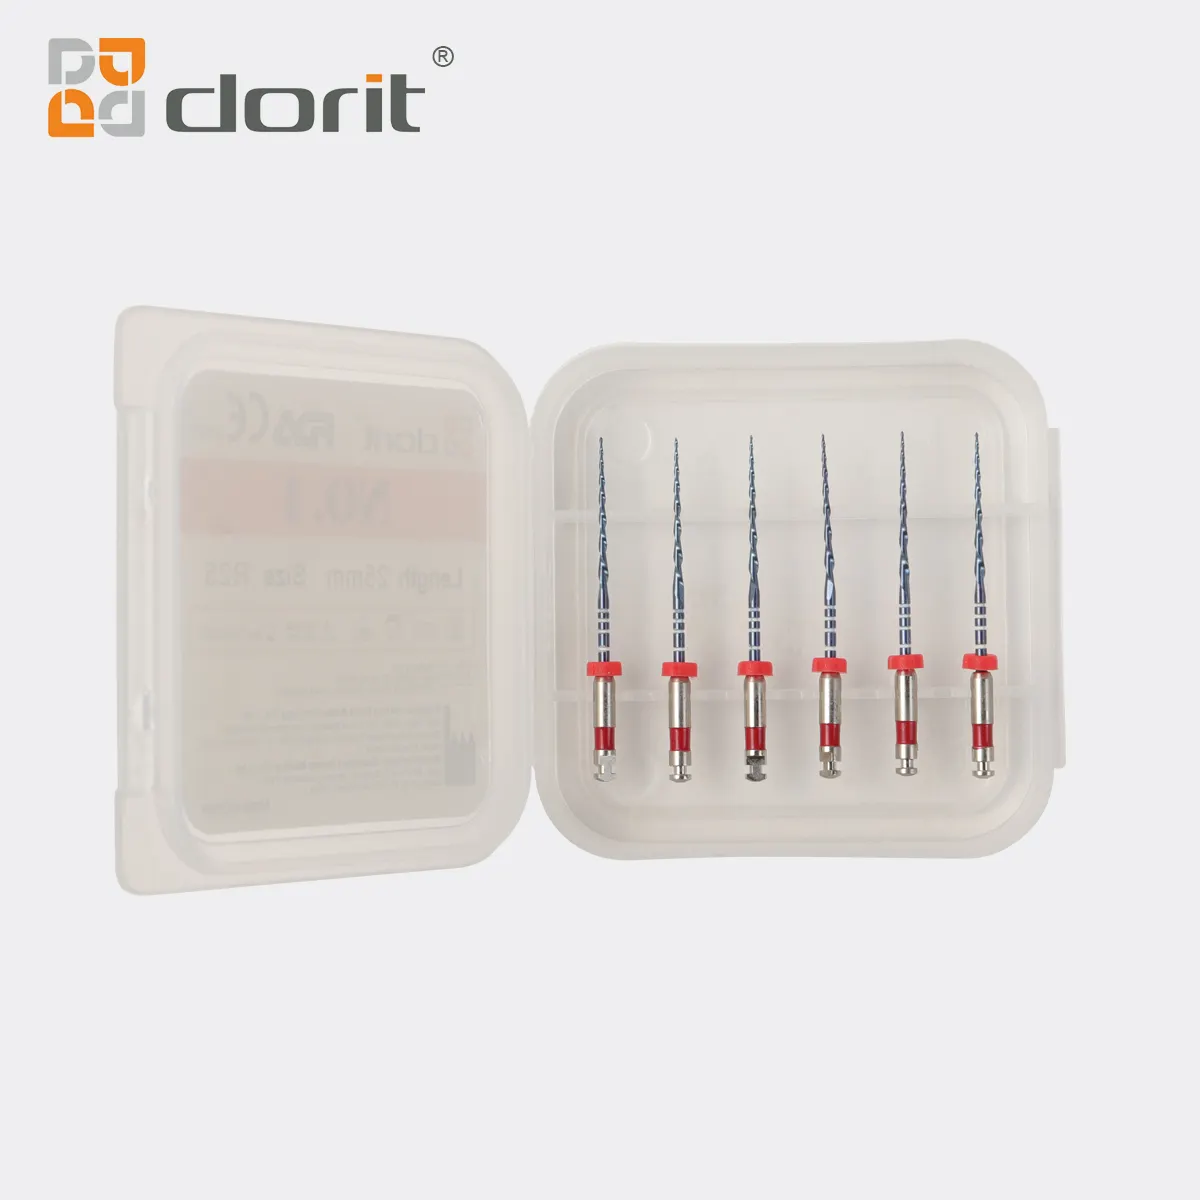 High quality super root porta limas endodoncia Only One File Reciprocating Rotary File endodontic xp endo file